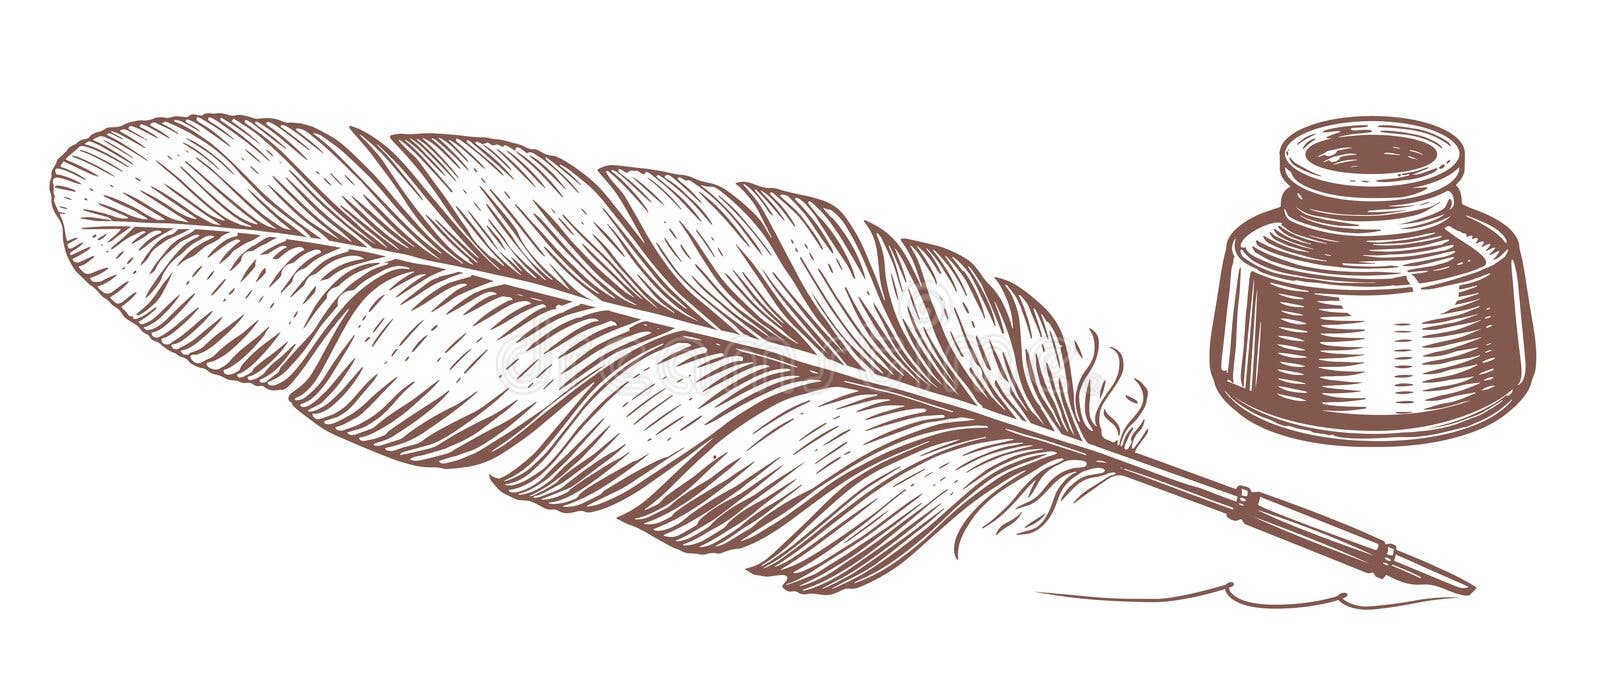 Vintage feather or quill pen in inkwell sketch Vector Image